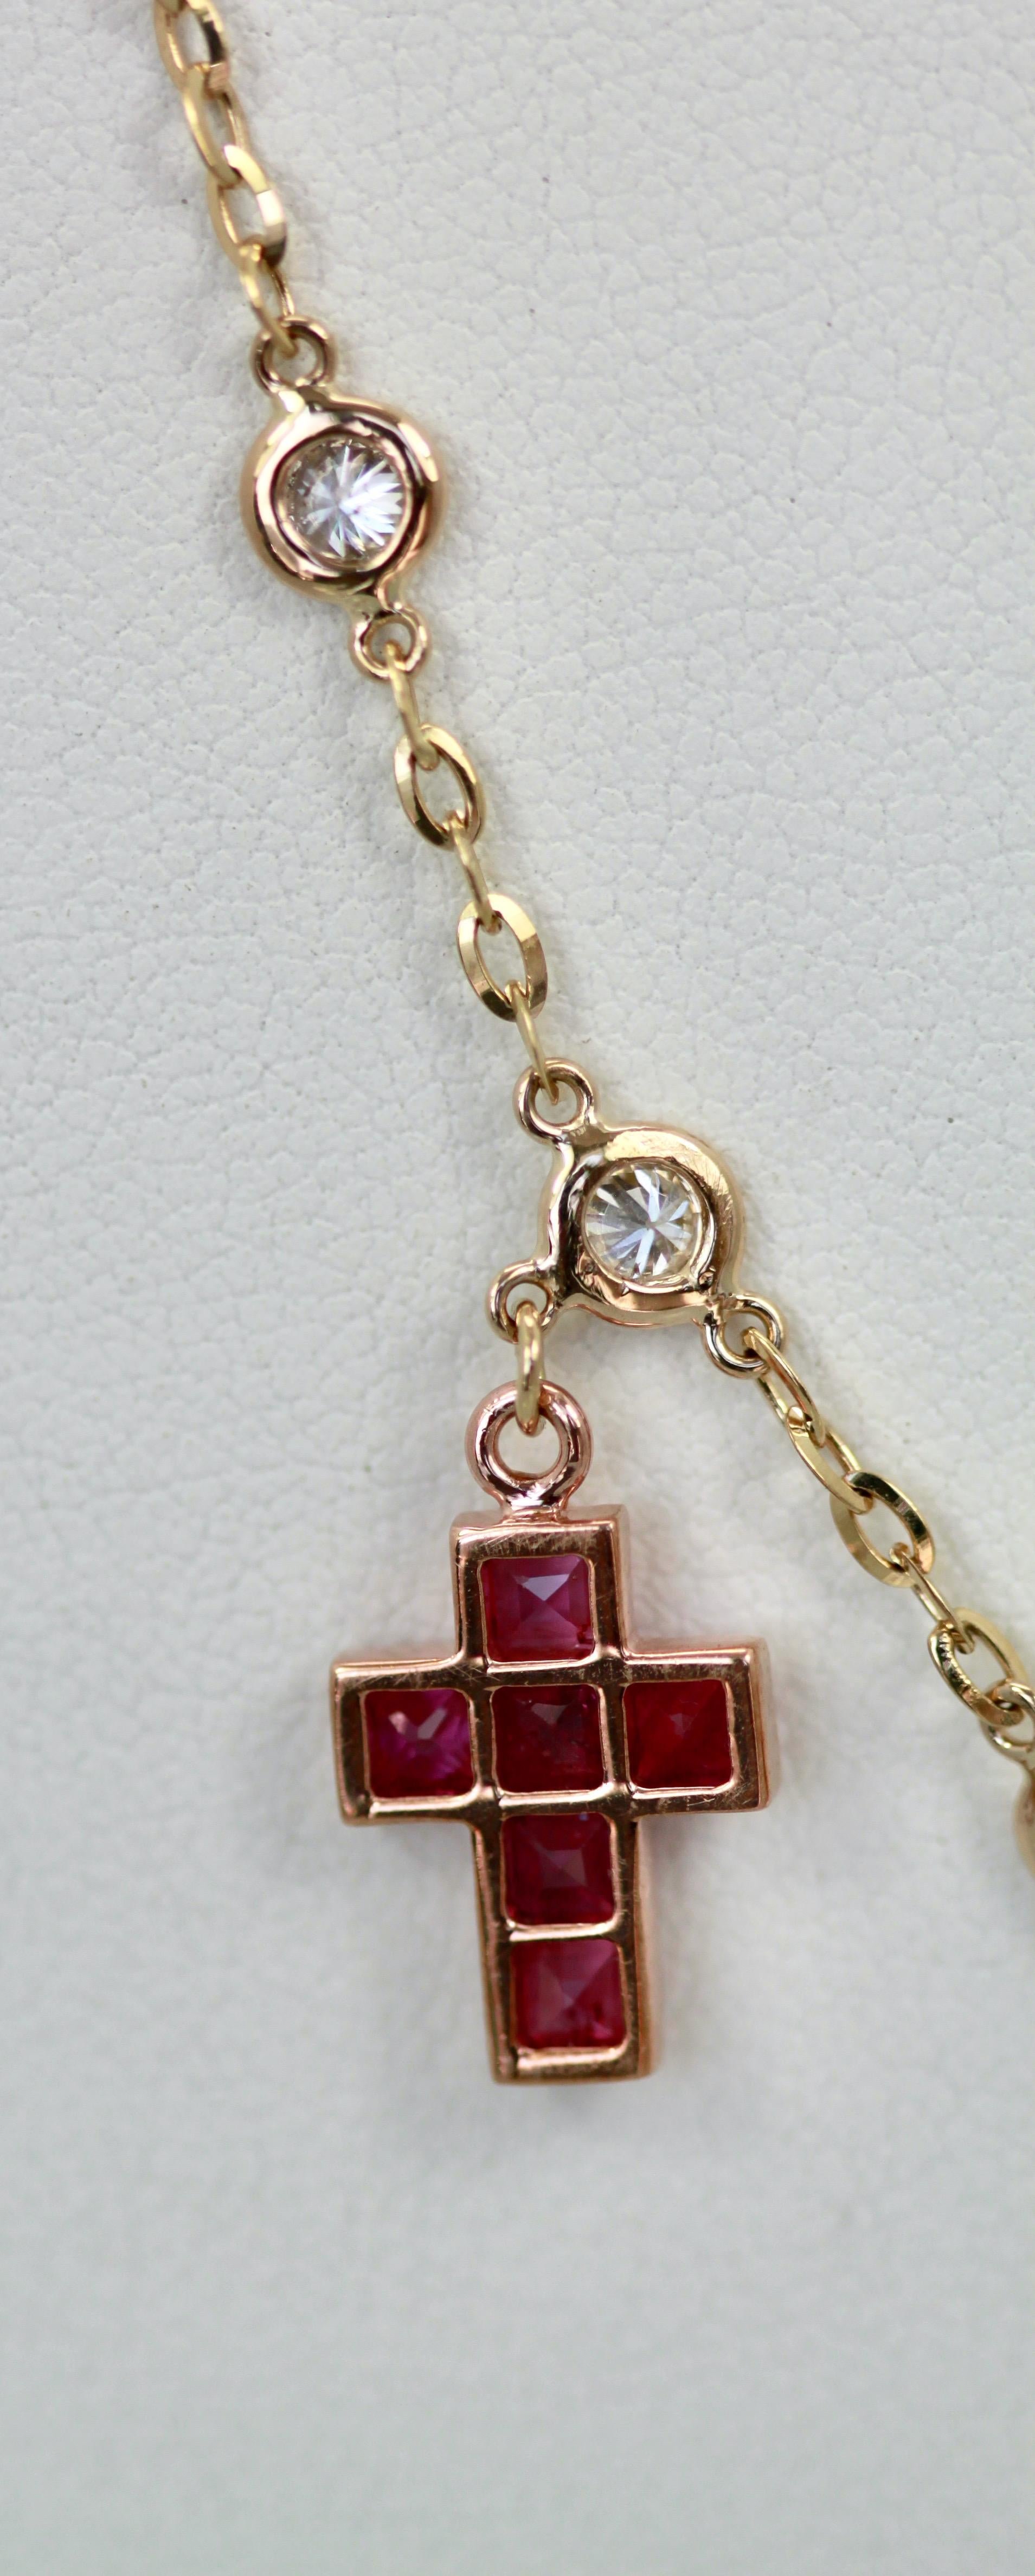 necklace with three crosses